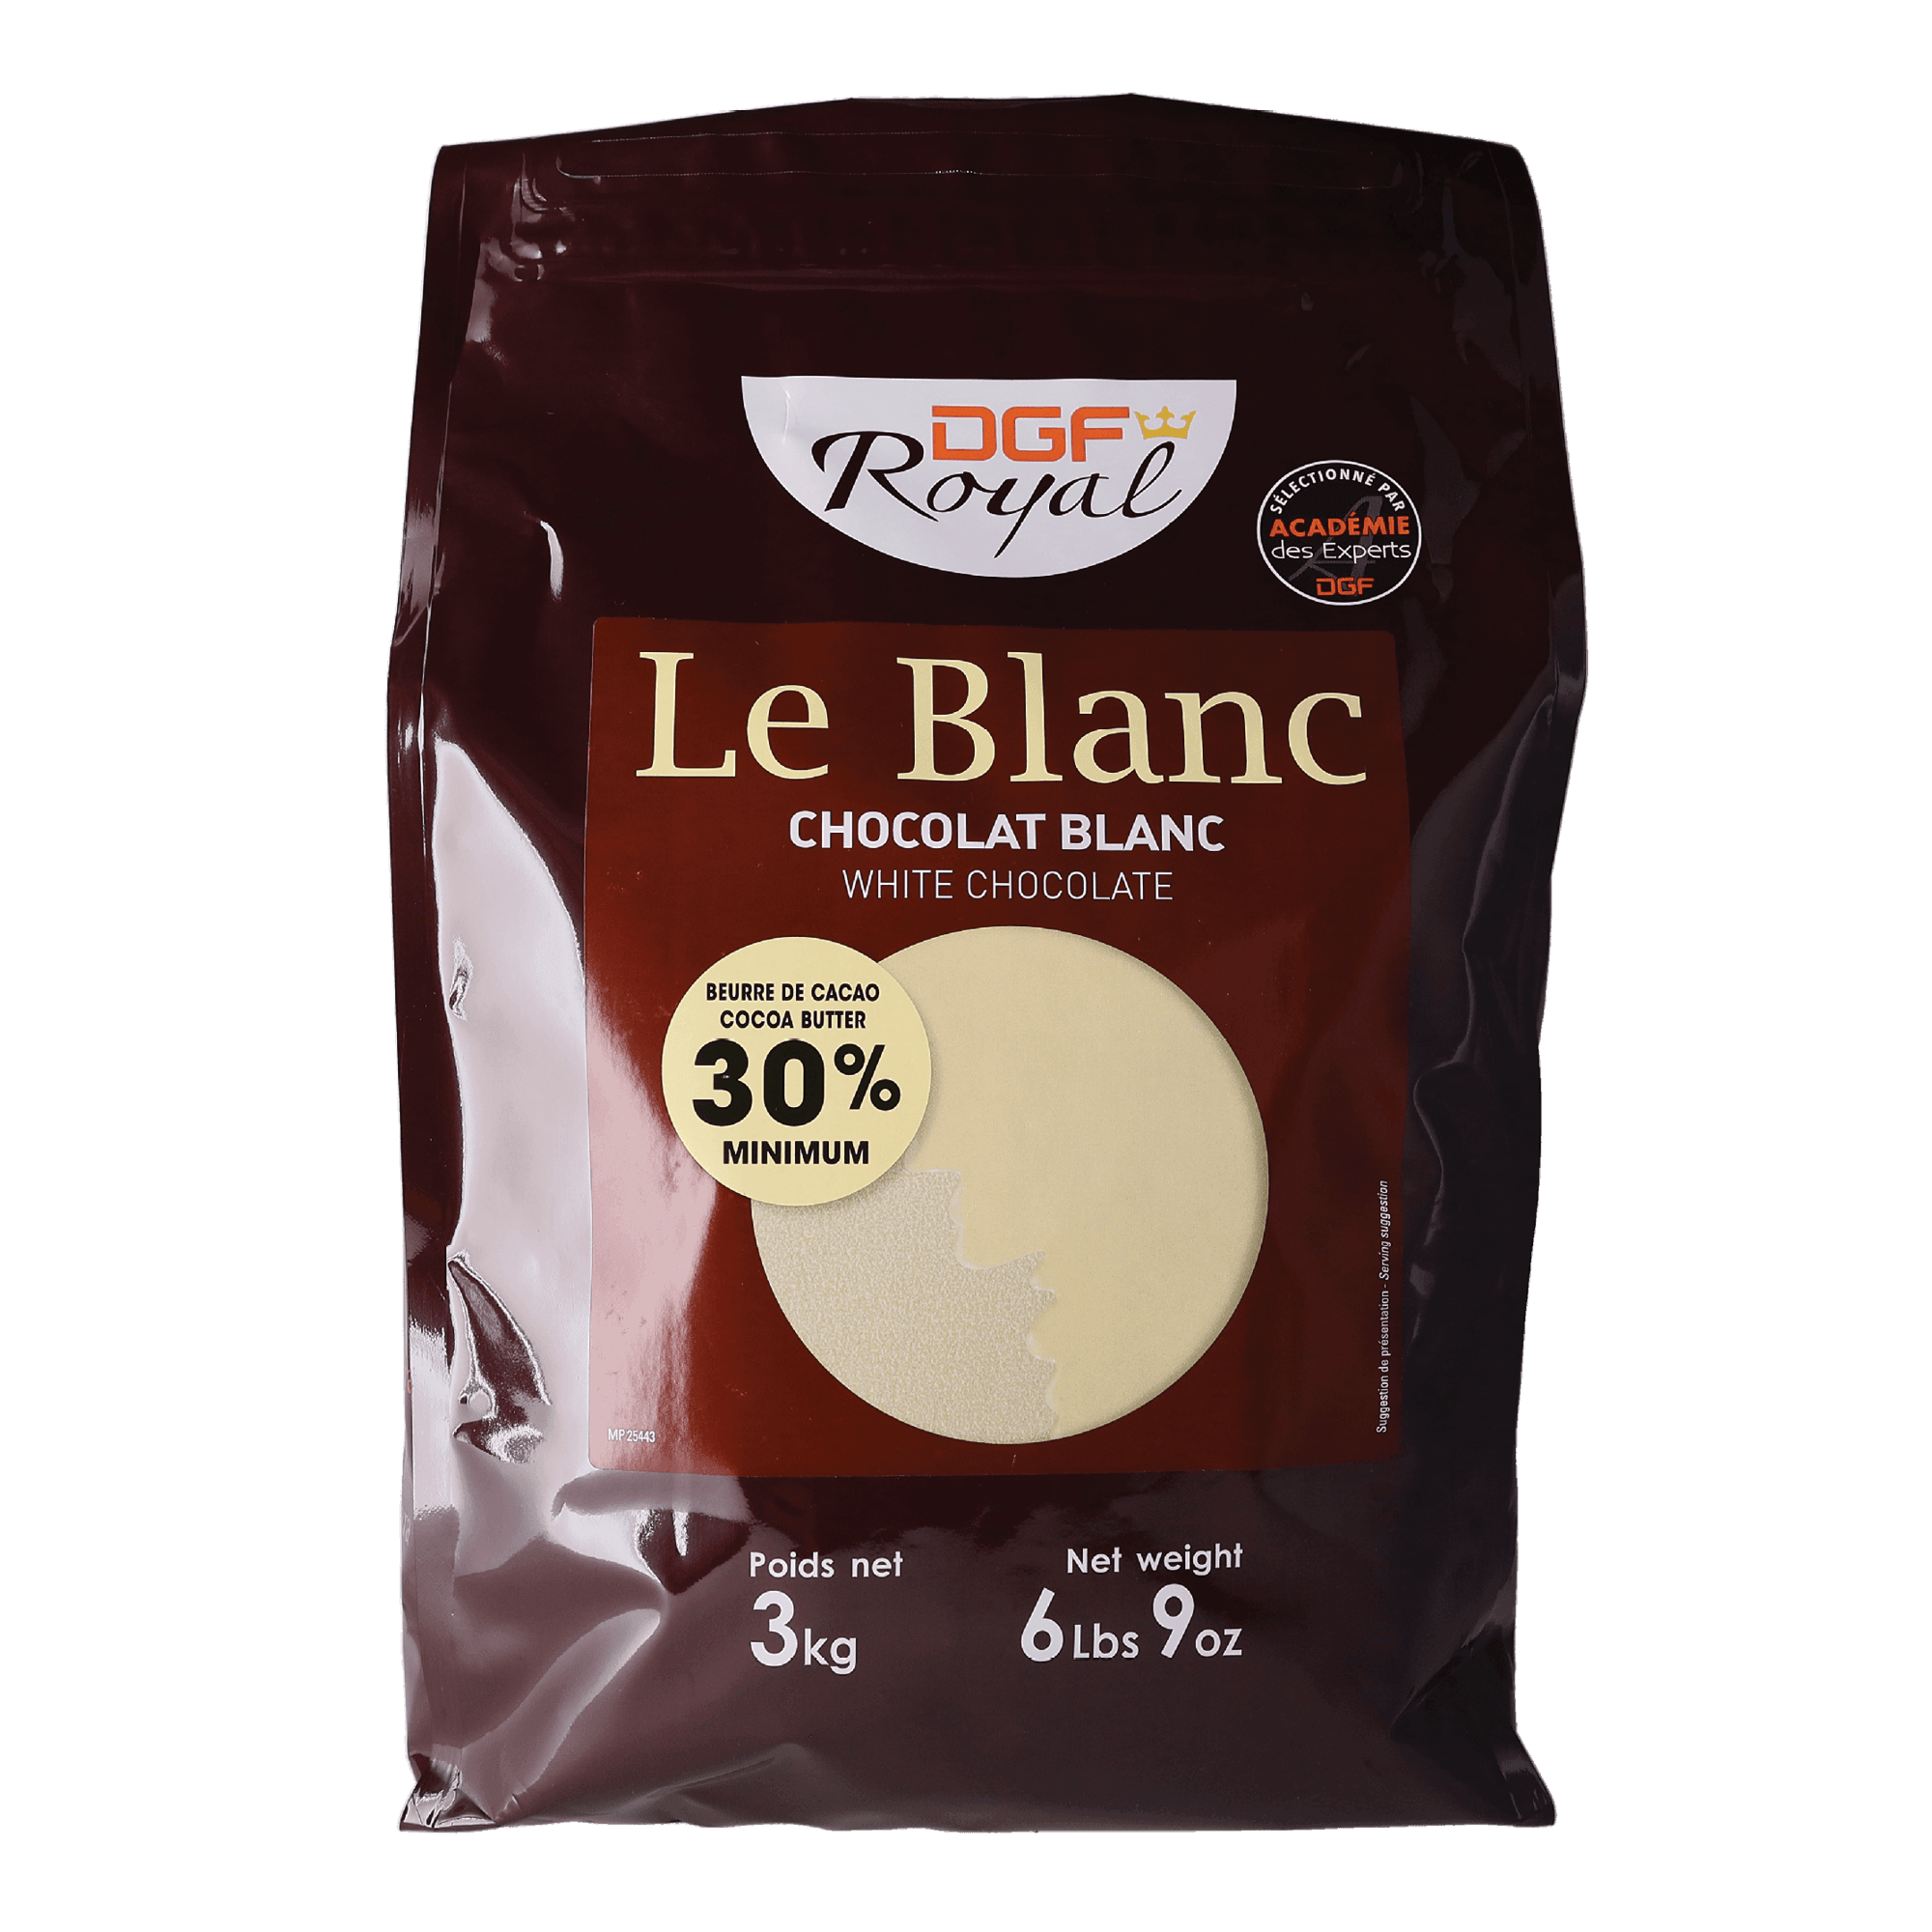 Le Blanc Chocolate Couverture White 30% - Savory Gourmet